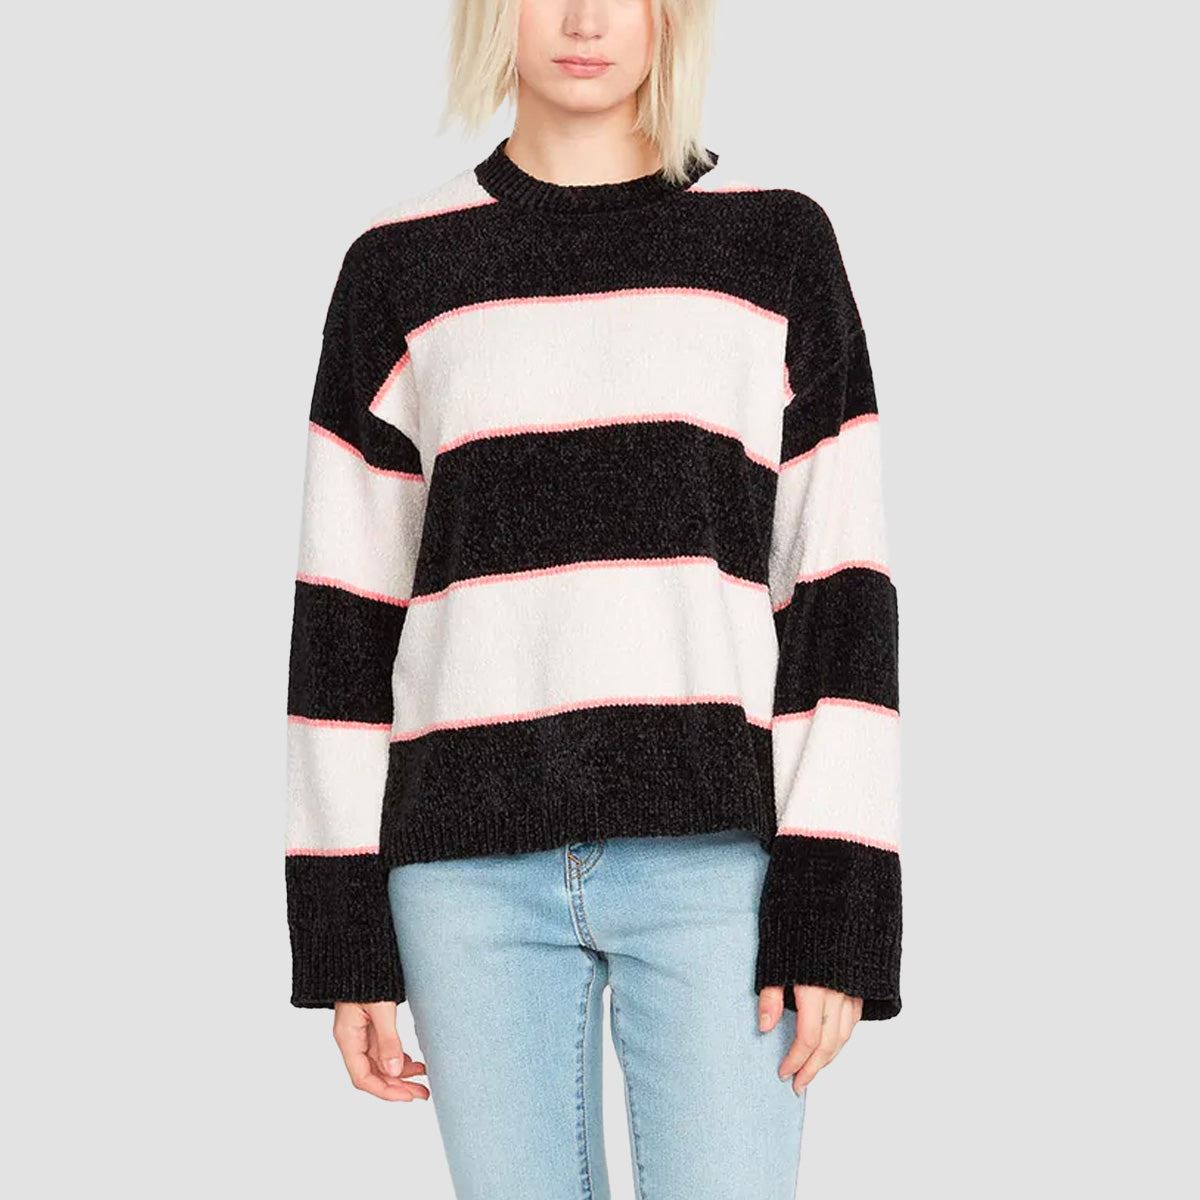 Women's Crewneck Feathered Pullover Sweater - Knox Rose™ Black L